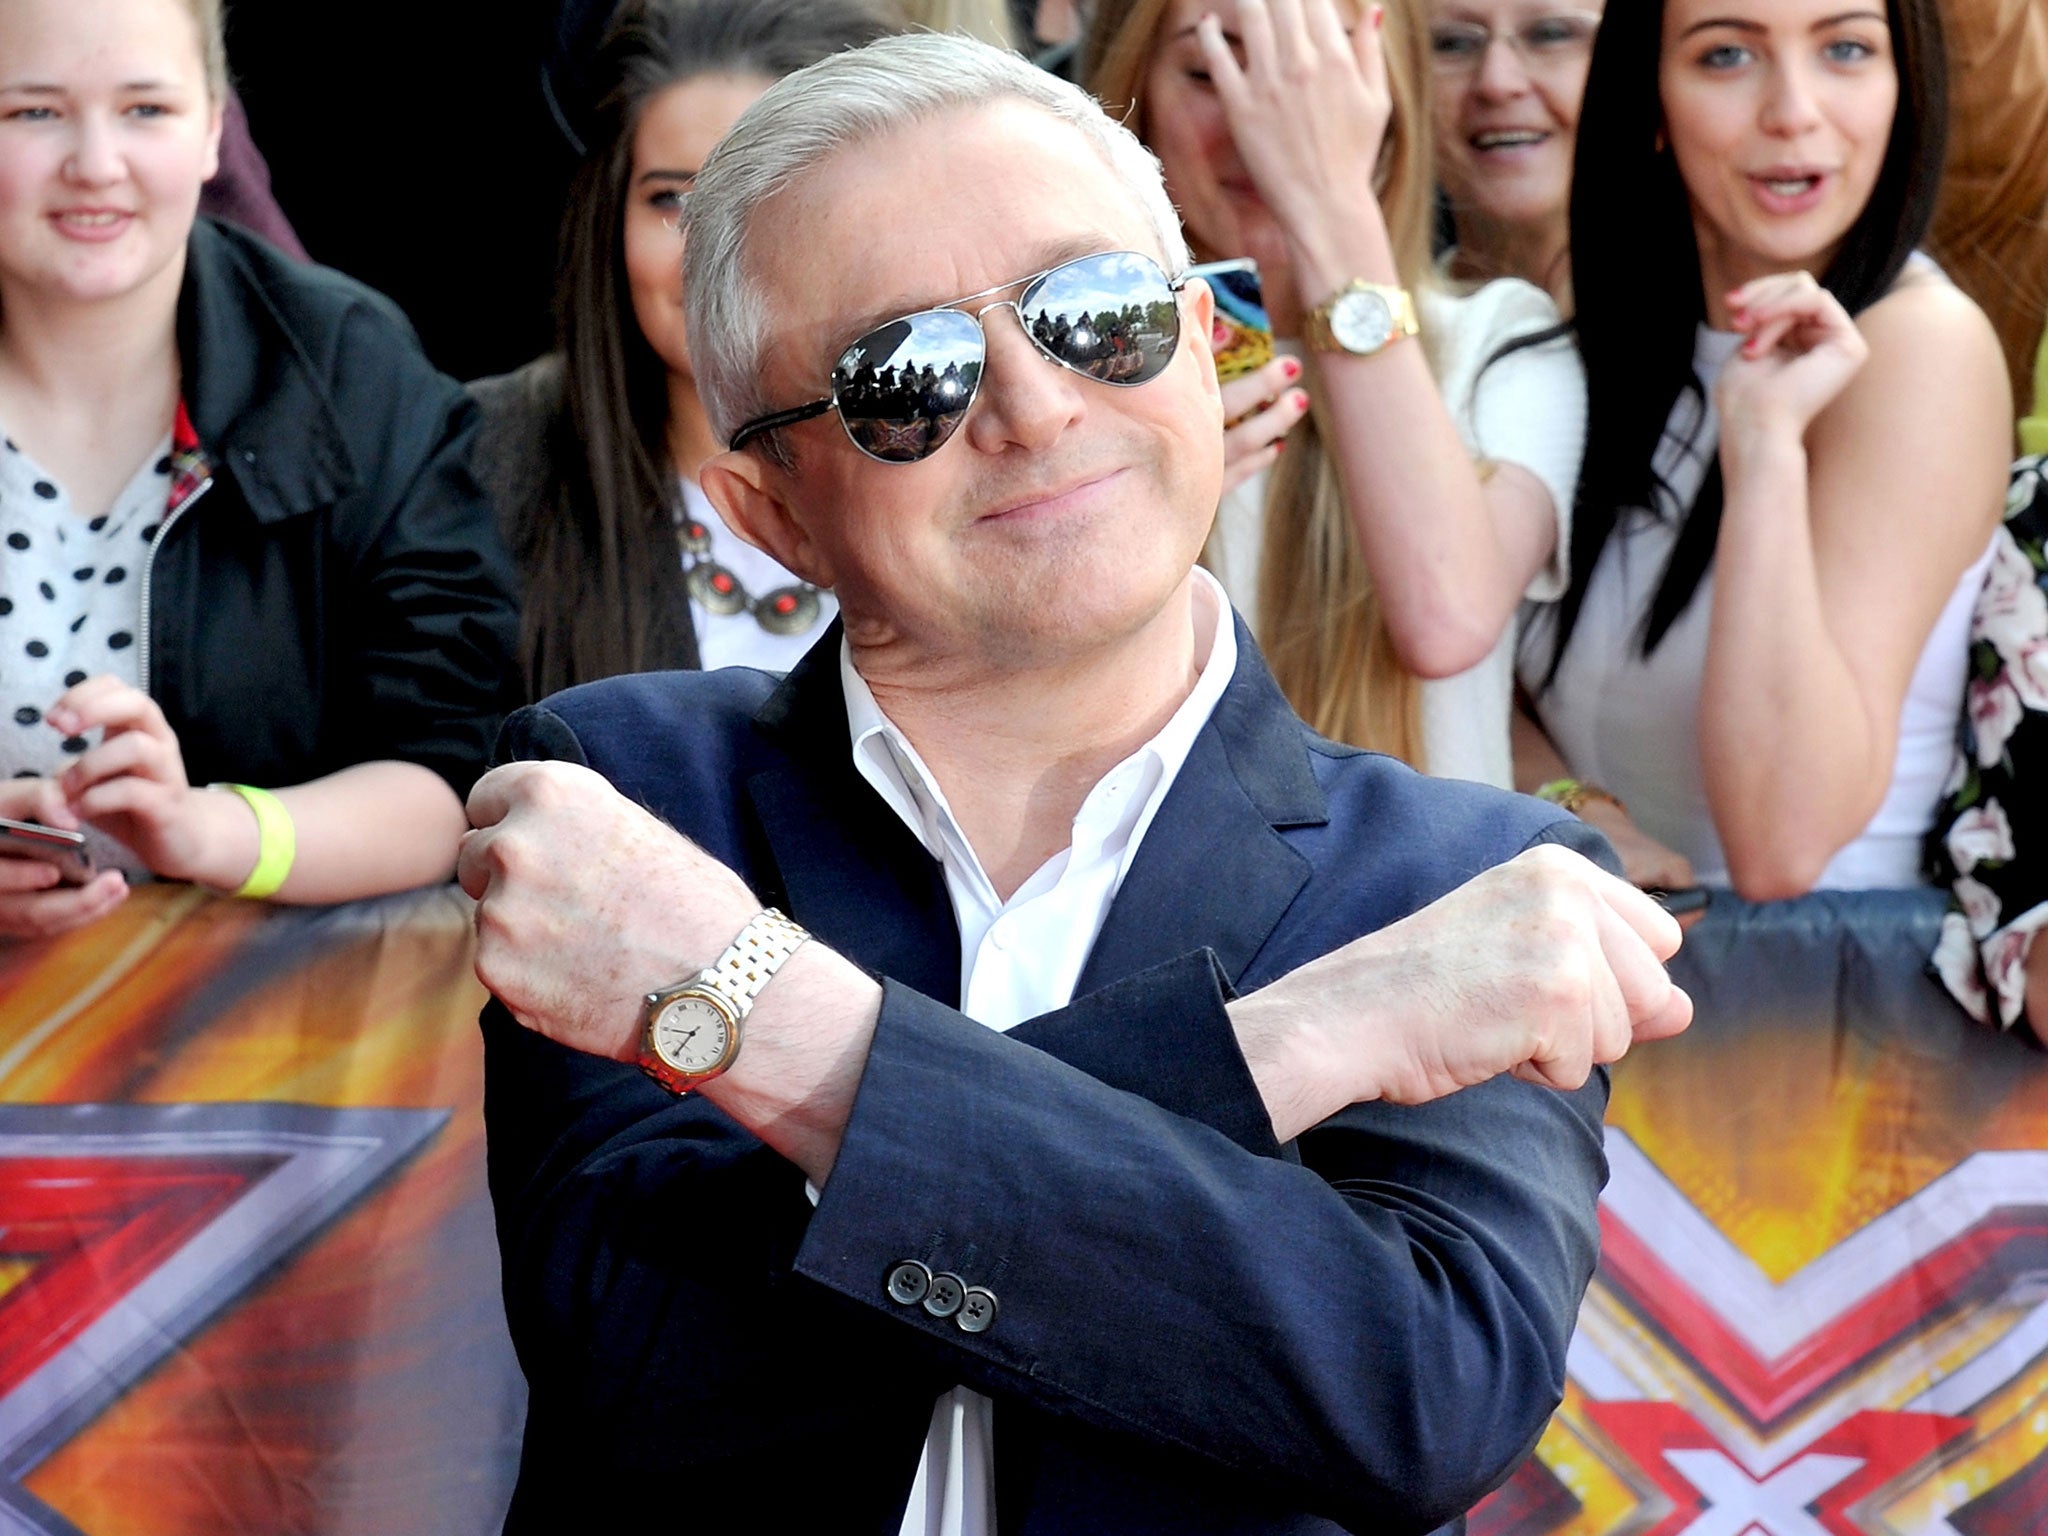 Louis Walsh's X Factor judging days appeared to be over